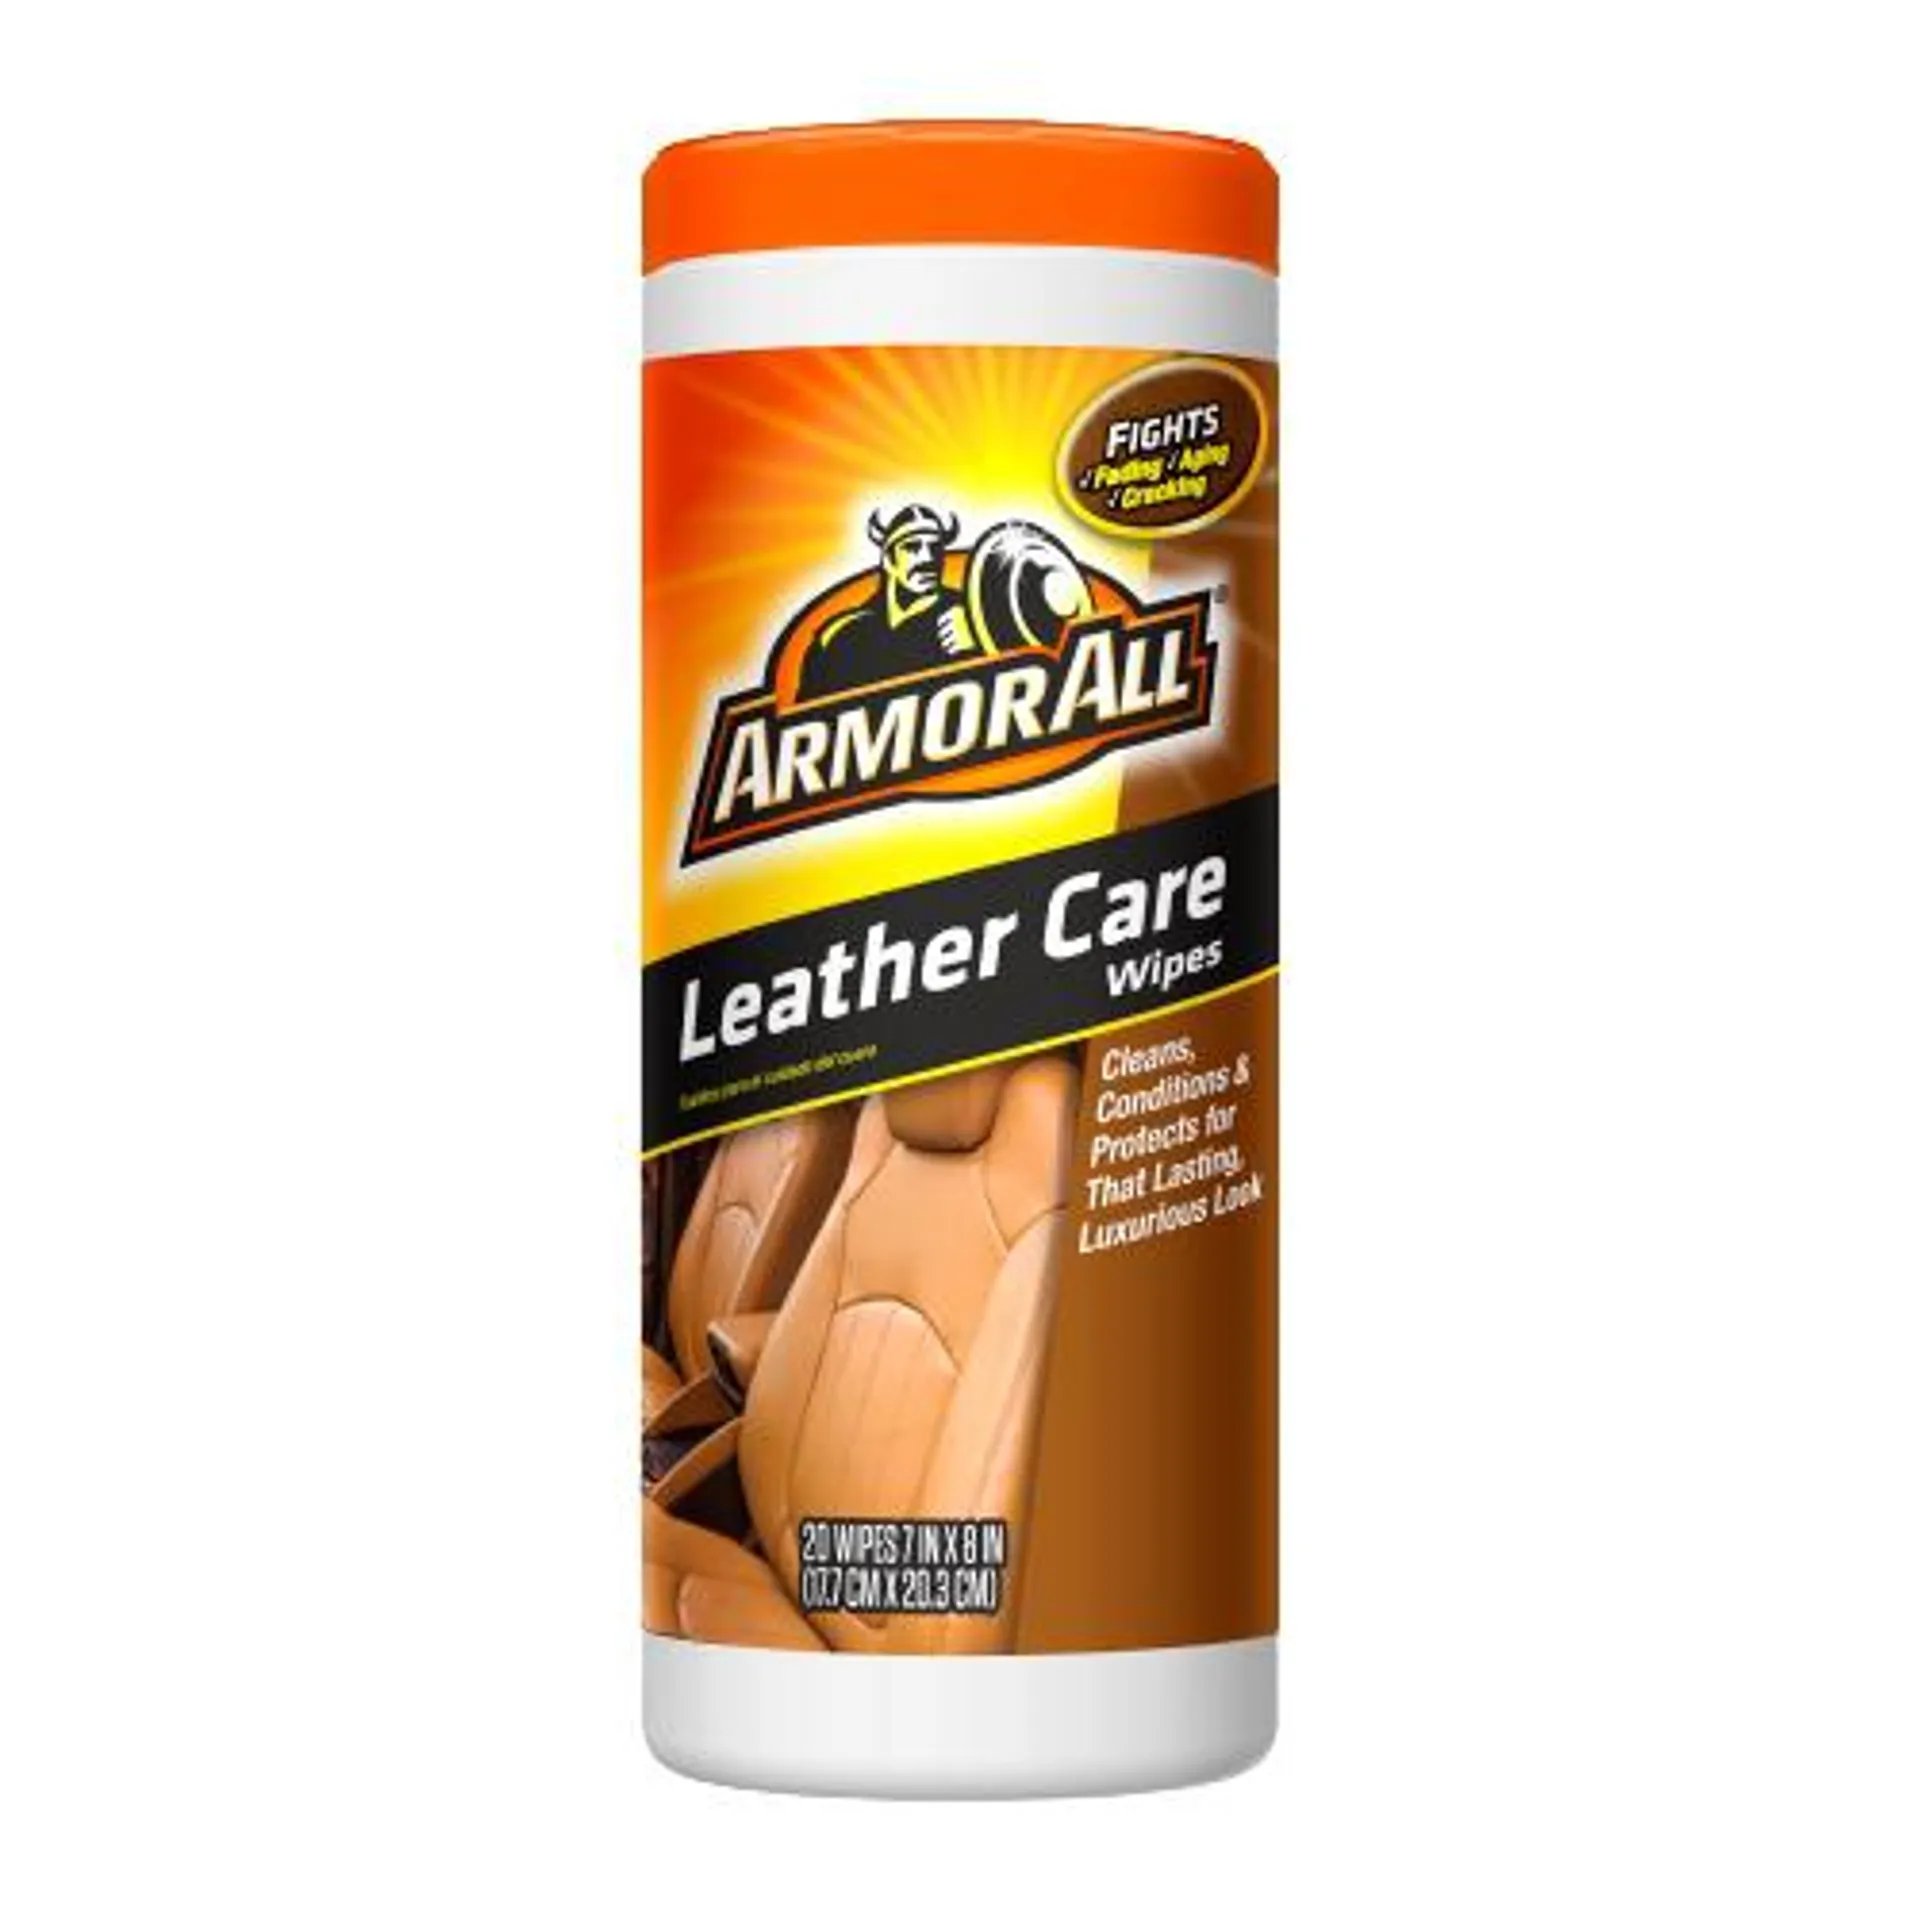 ArmorAll Leather Care Wipes, 20 Count